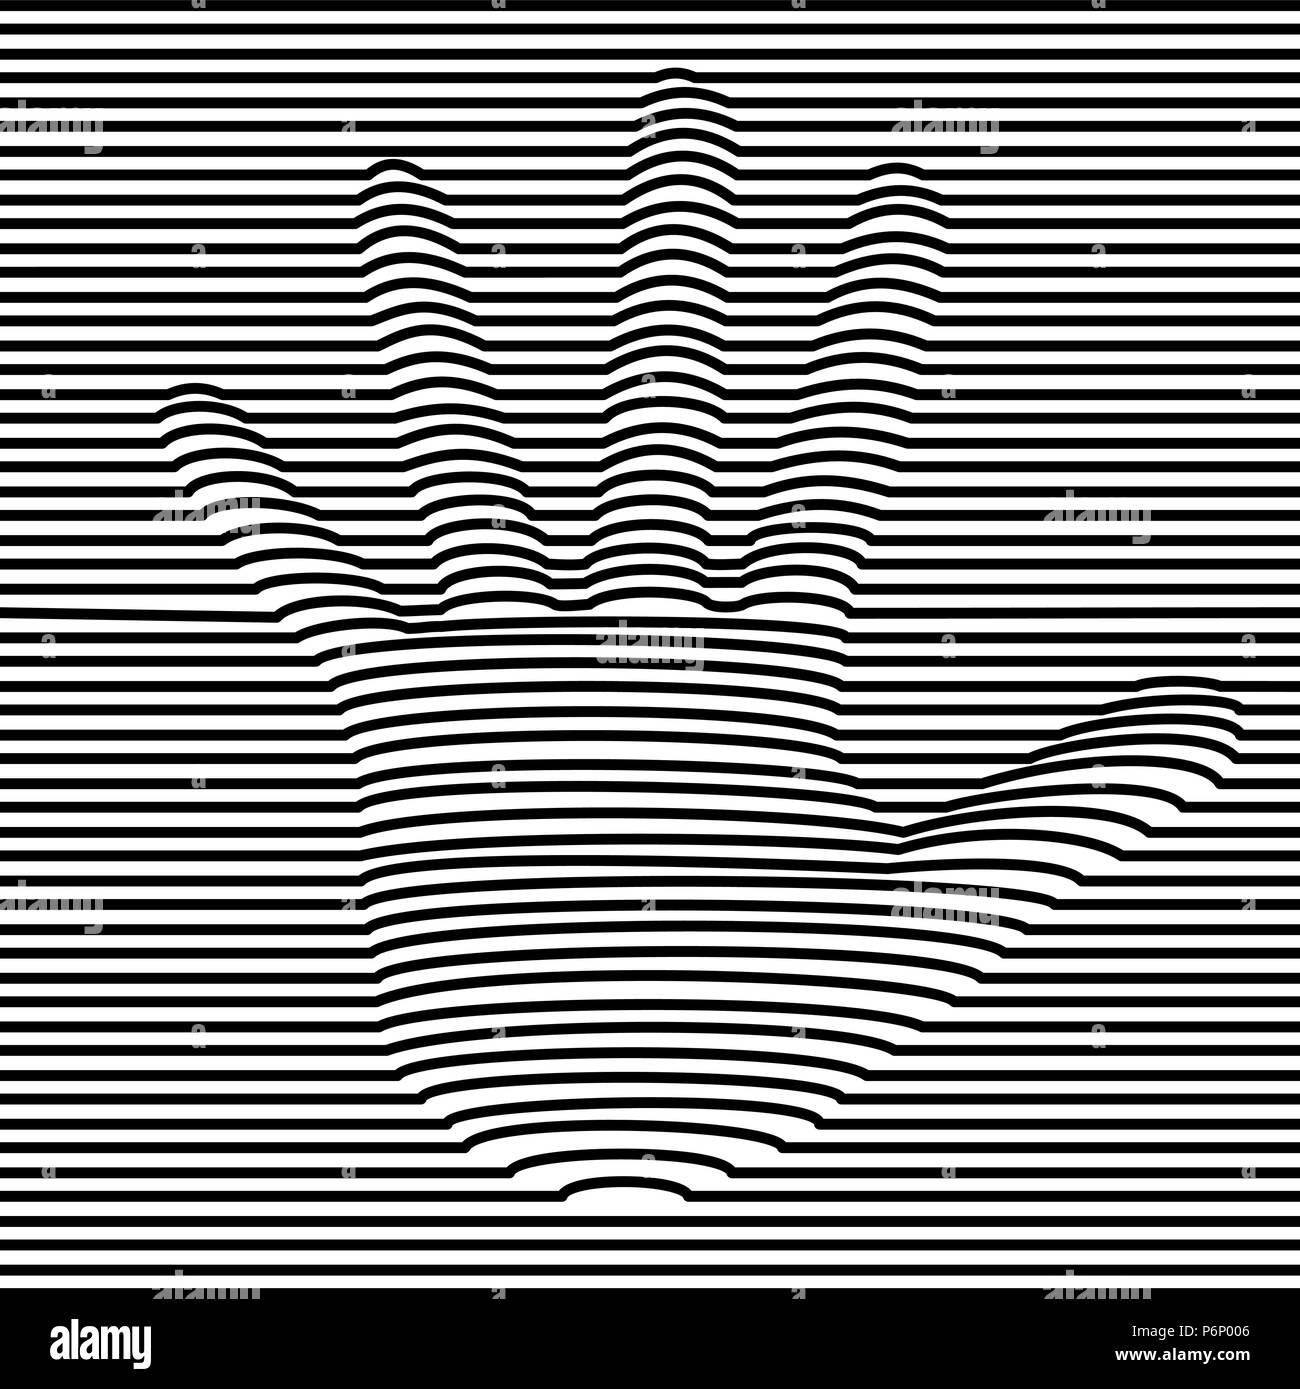 Human hand optic illusion illustration in black and white. 3d volume effect abstract design. EPS10 vector. Stock Vector